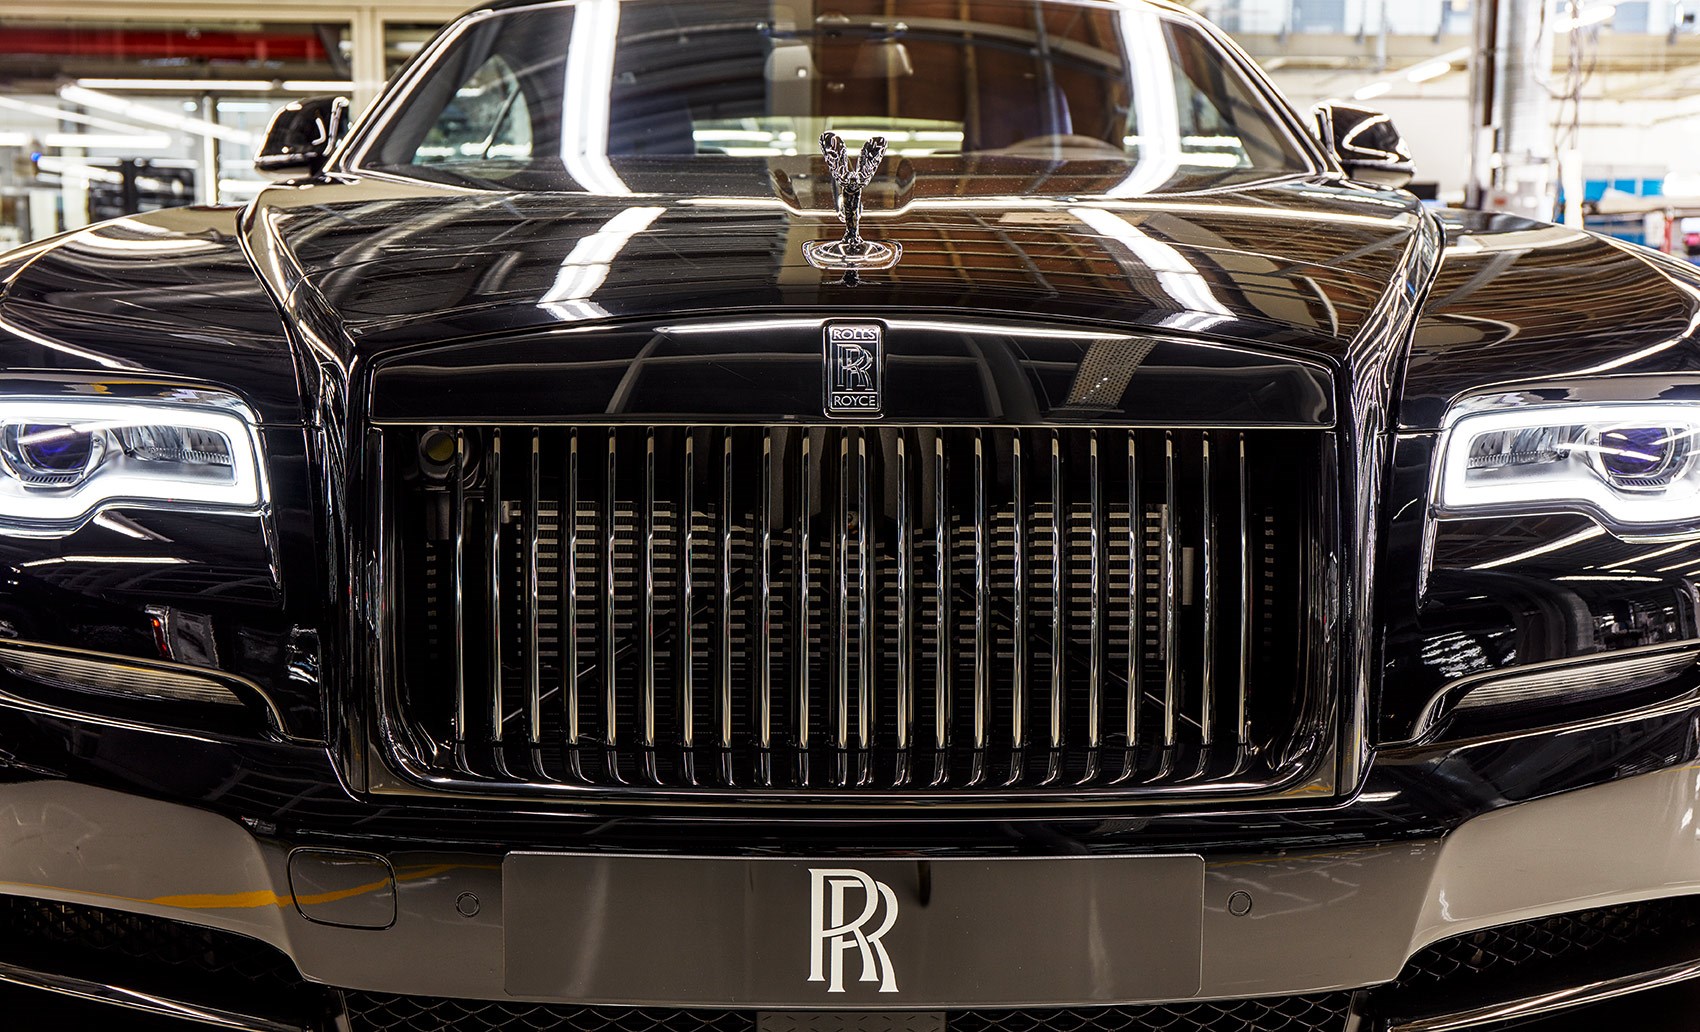 2021 was the best ever year for Rolls Royce in its 117year history   Luxurylaunches